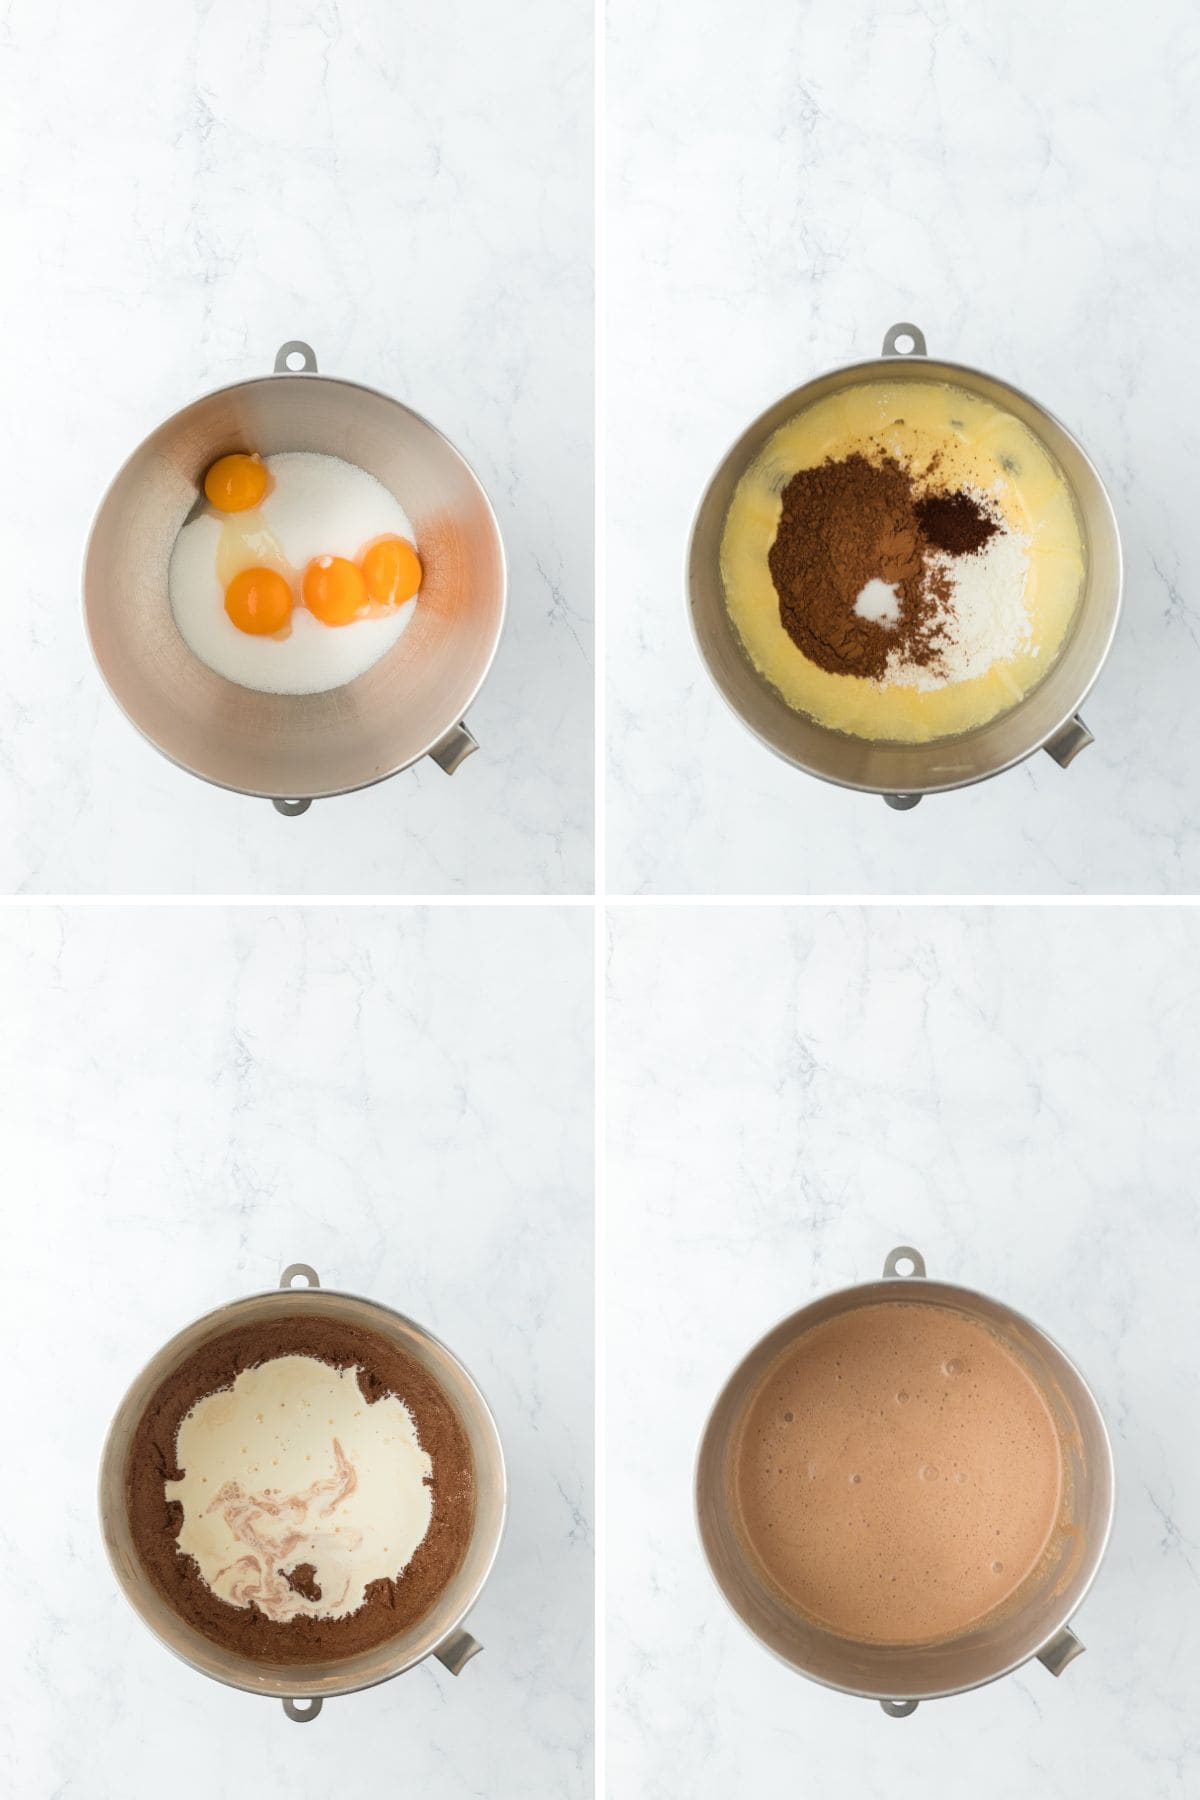 A collage of images for making the creamy chocolate pie filling.